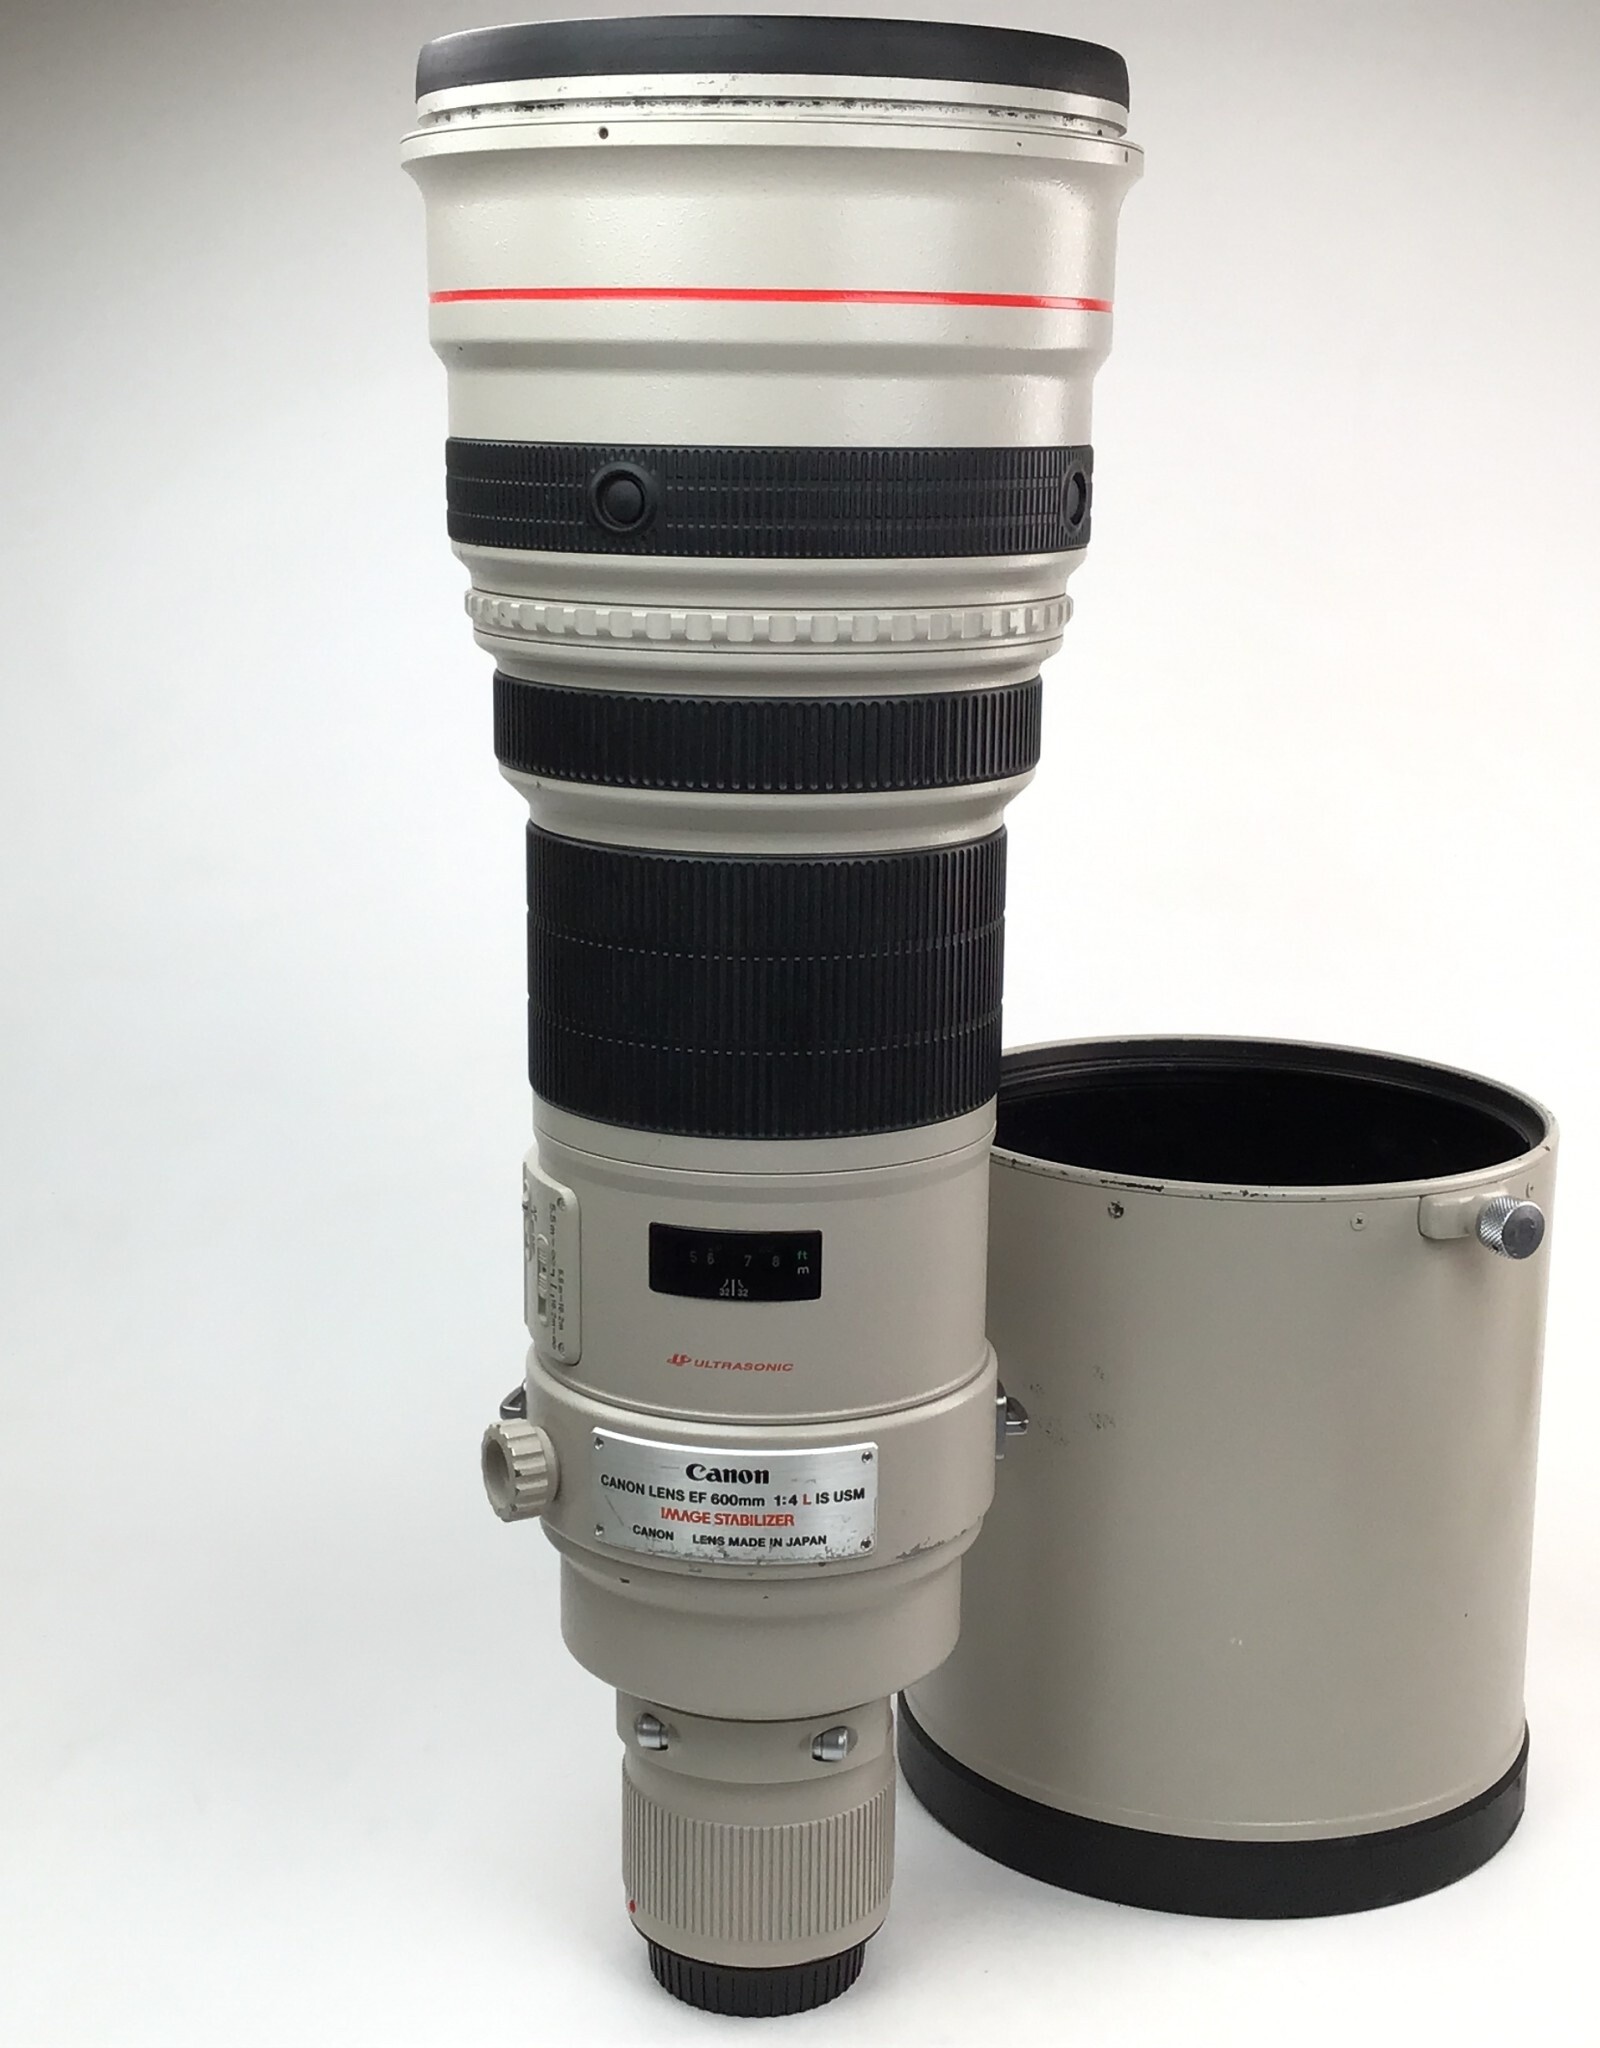 CANON Canon EF 600mm f4 L IS USM Lens  w/Case Used Fair